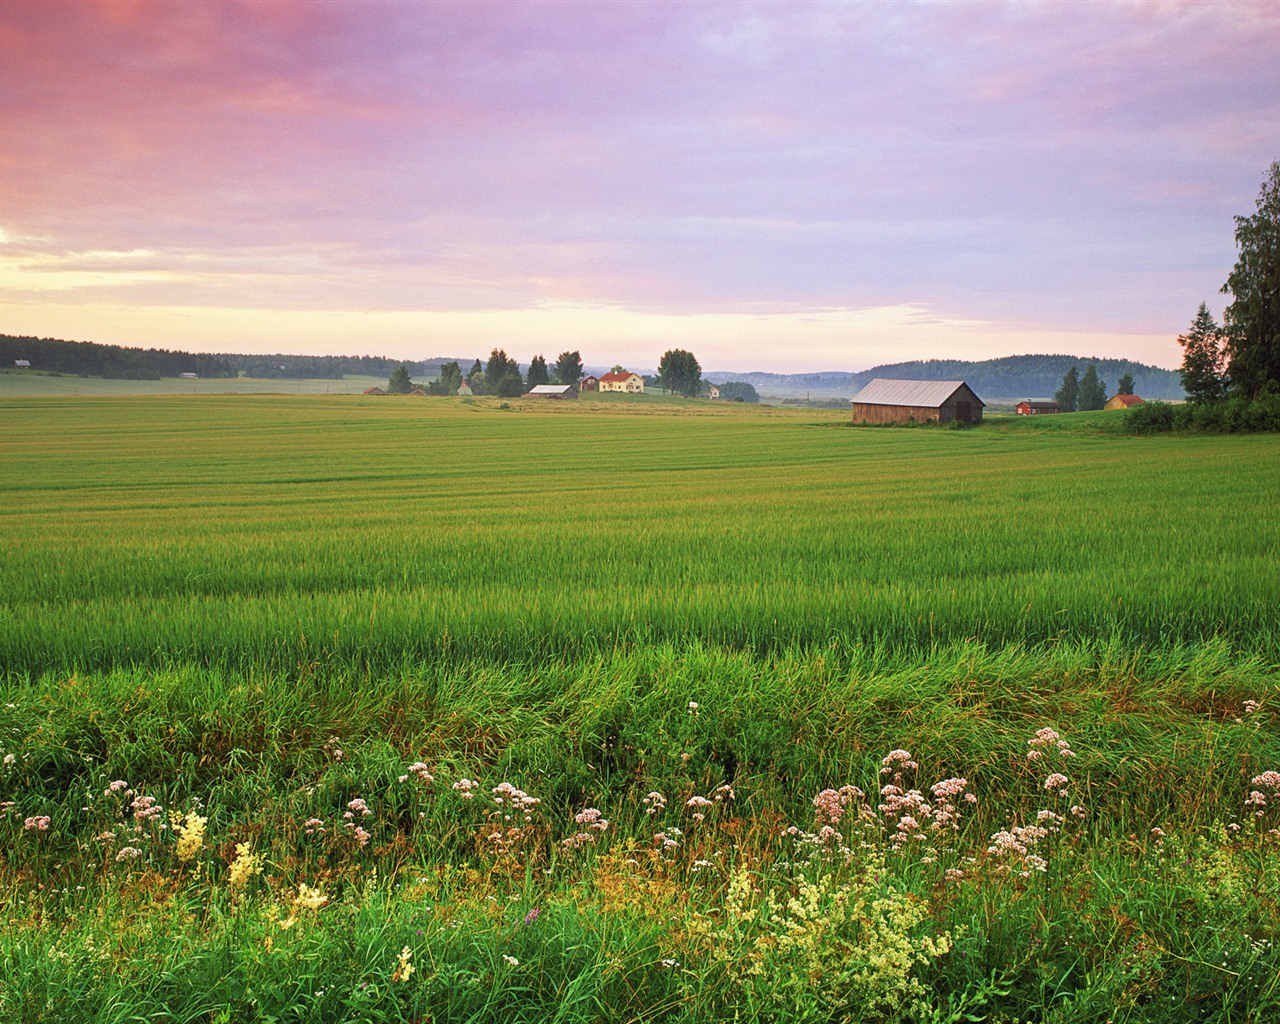 Windows 7 Wallpapers: Nordic Landscapes #9 - 1280x1024